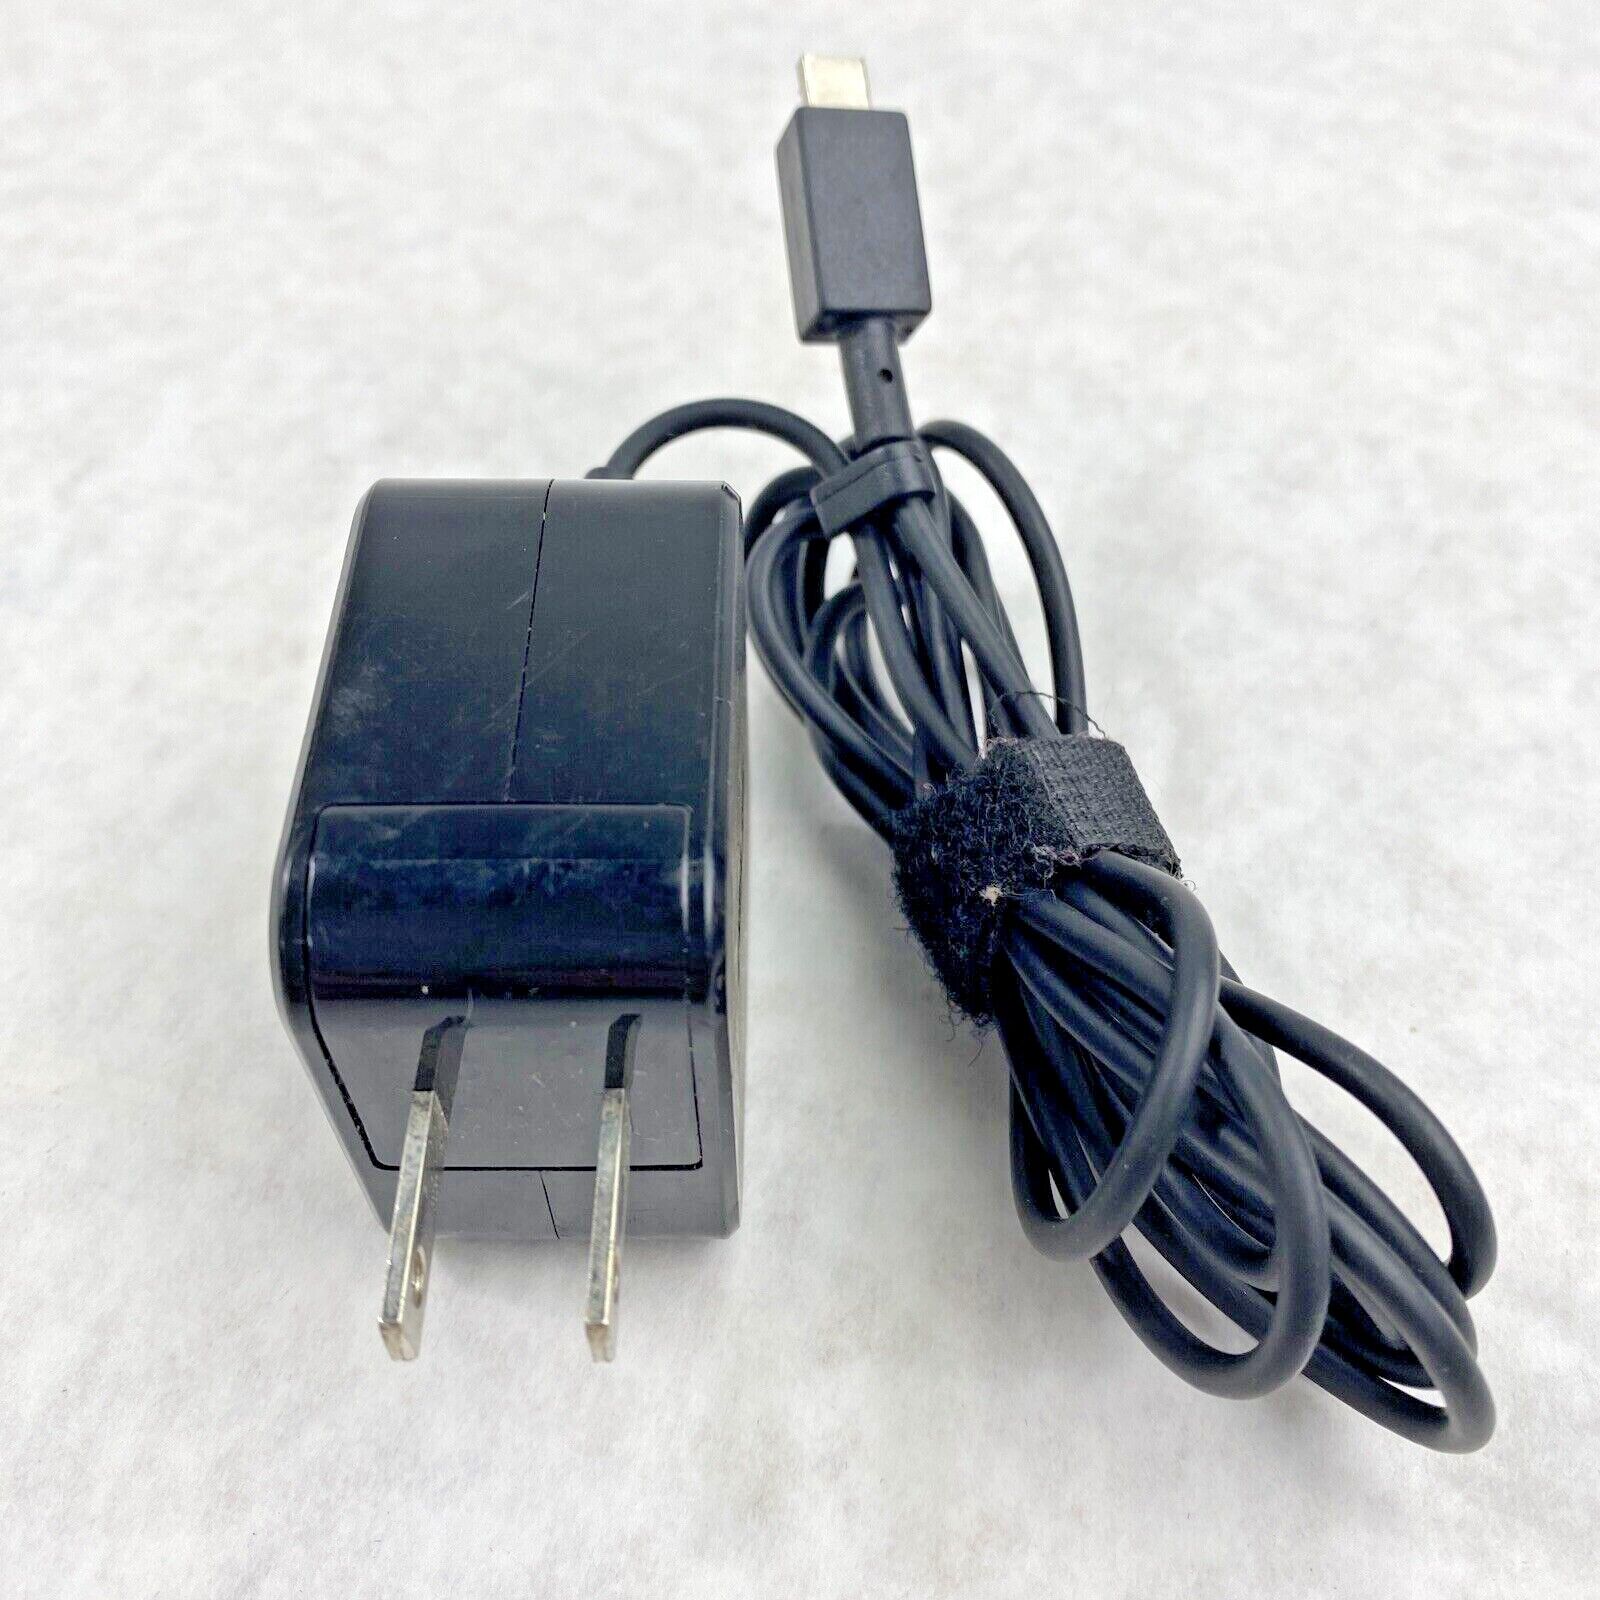 Lot of 5 Asus ADP-24EW B Genuine 24W 12V 2A Square Connector AC Adapter PSU OEM